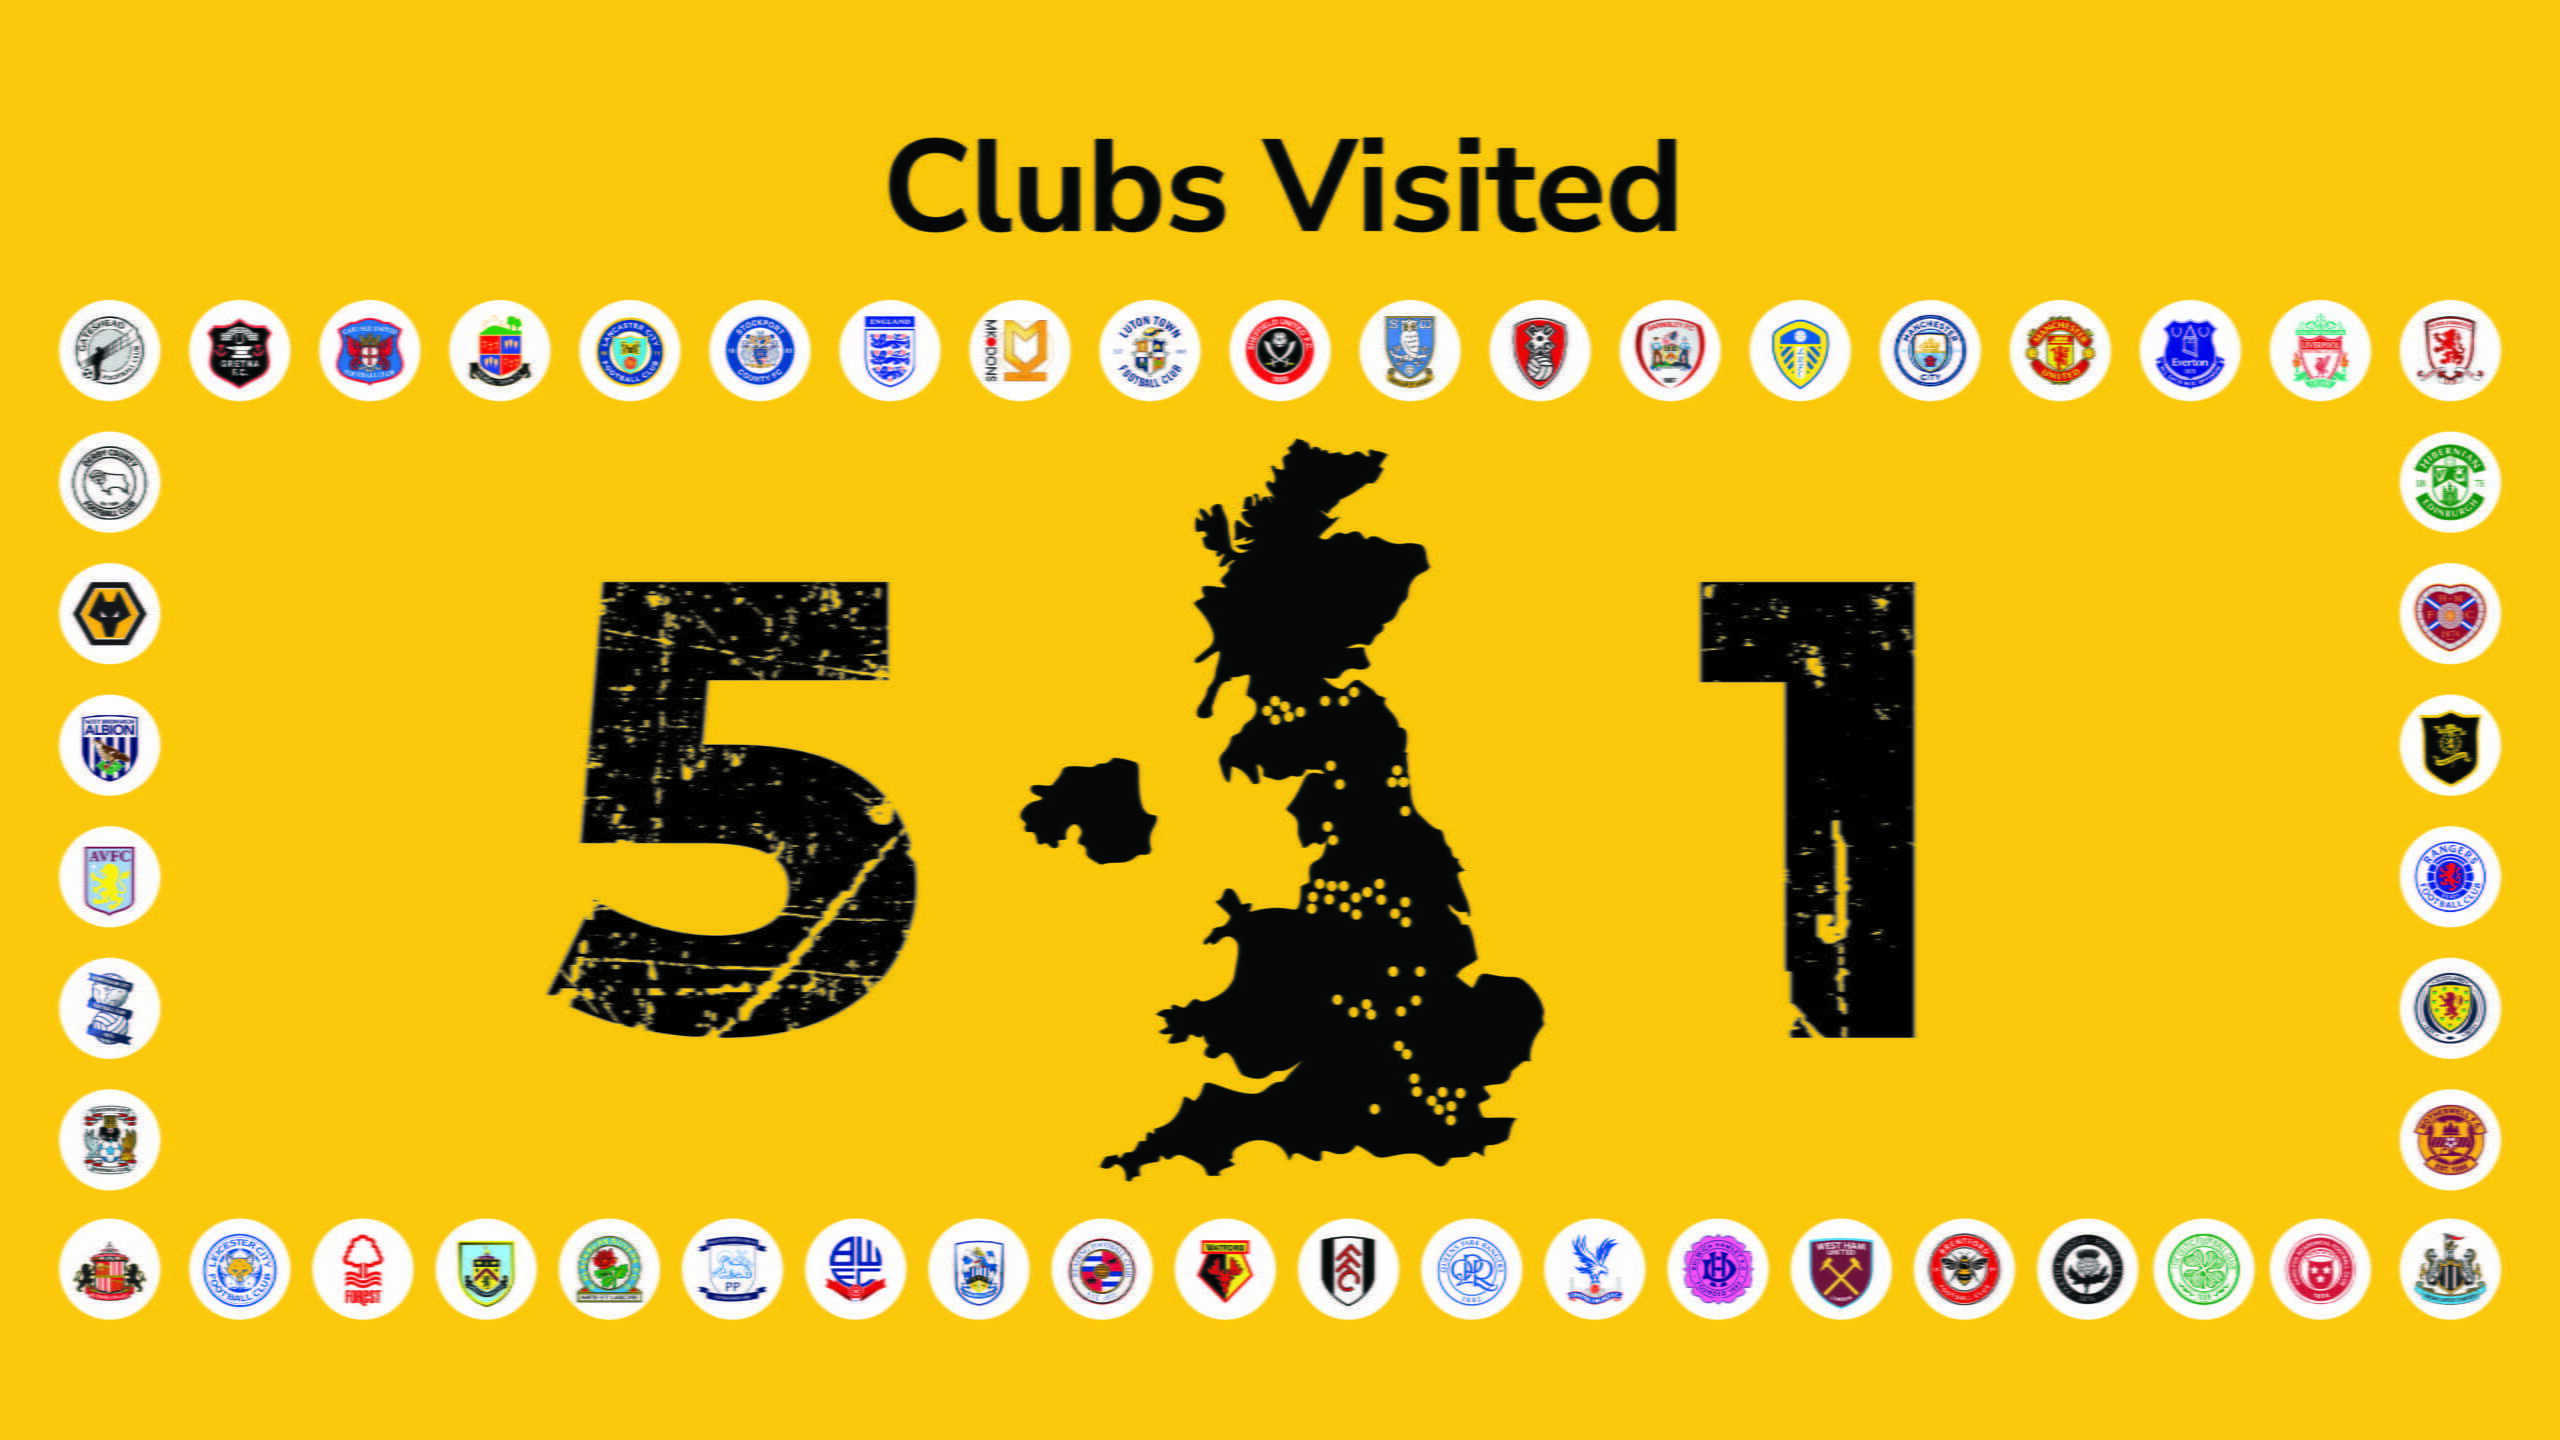 51 clubs visited